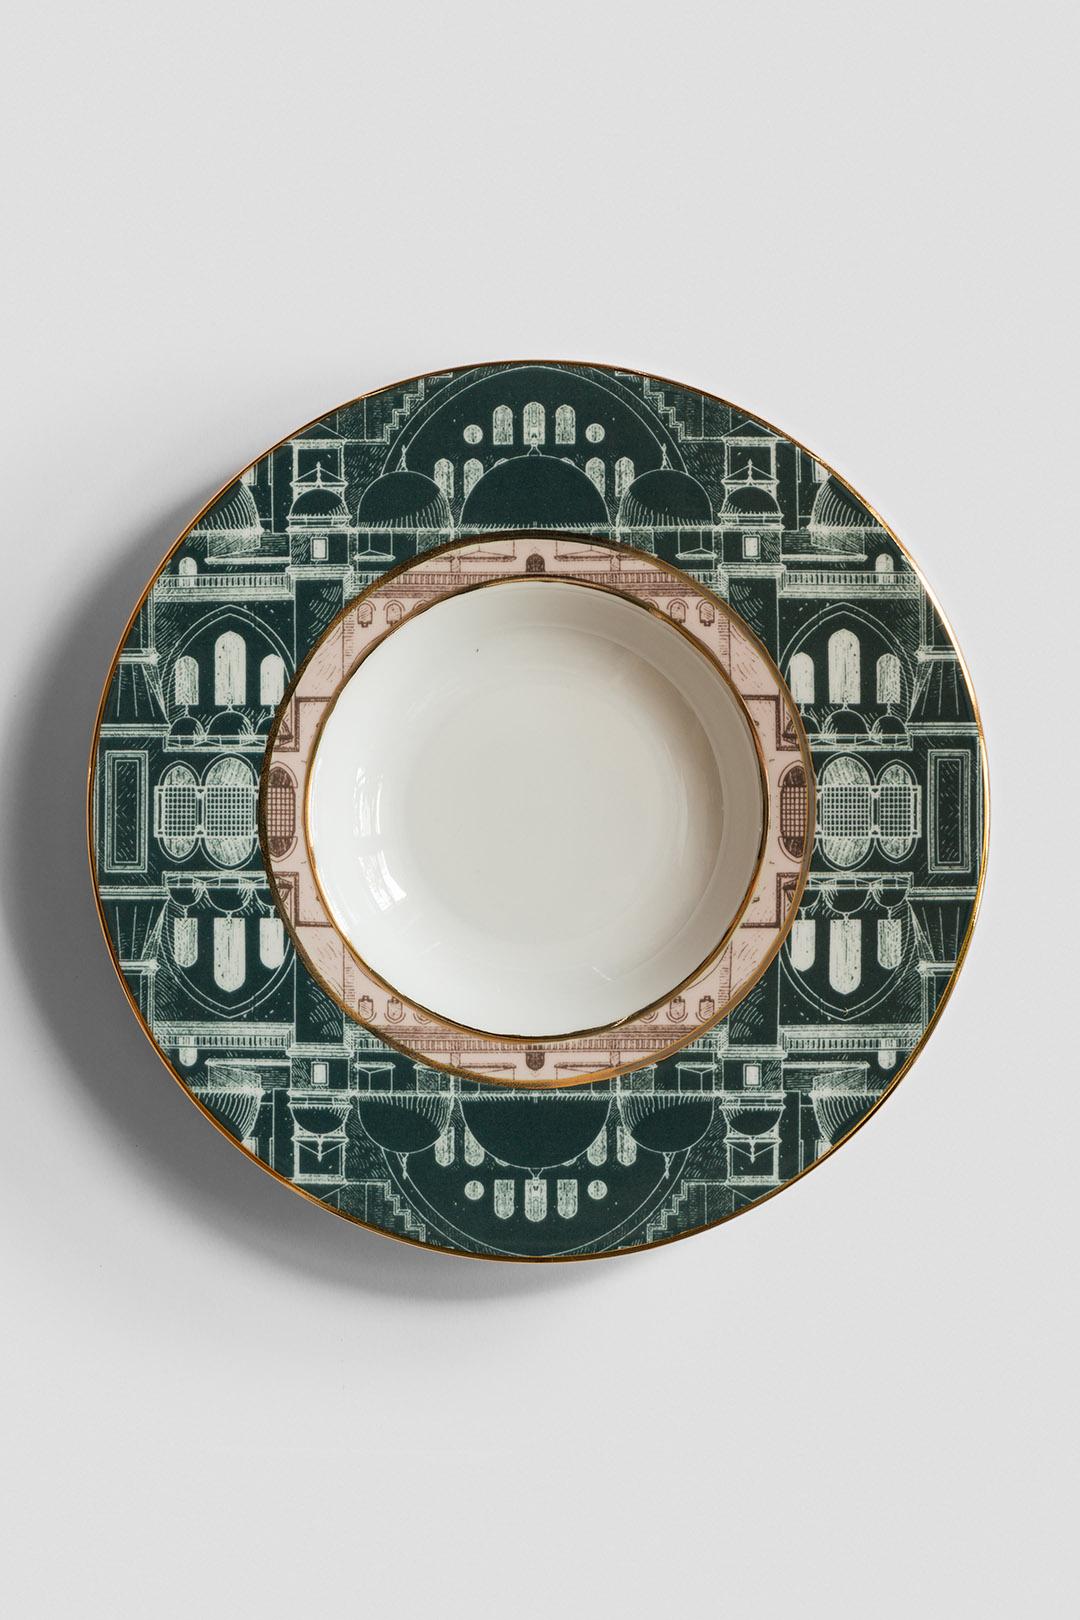 Handmade in Italy, designed by Vito Nesta. 

The set of 6 porcelain dinner plates represent beautiful images from Lebanon

Handmade in Italy.
 